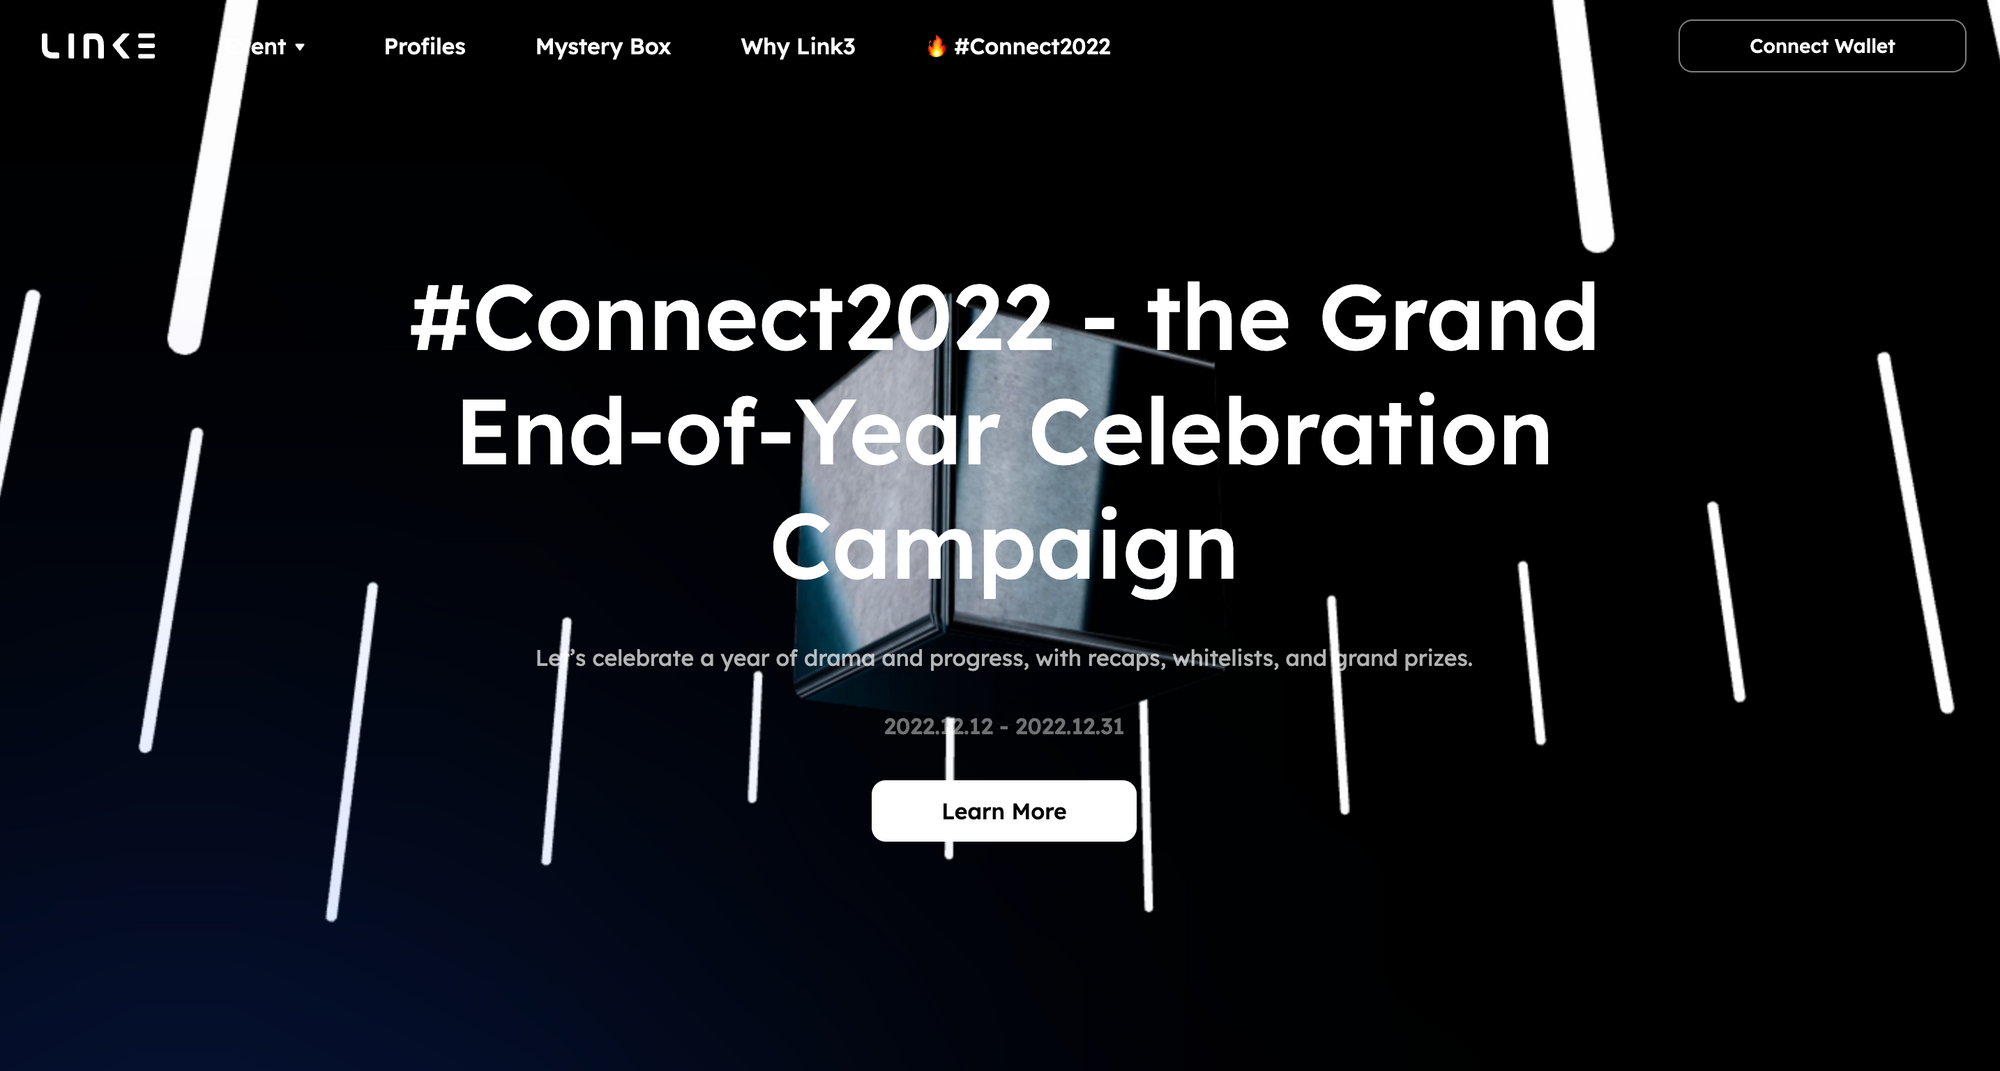 #Connect2022 campaign website: link3.to/connect2022